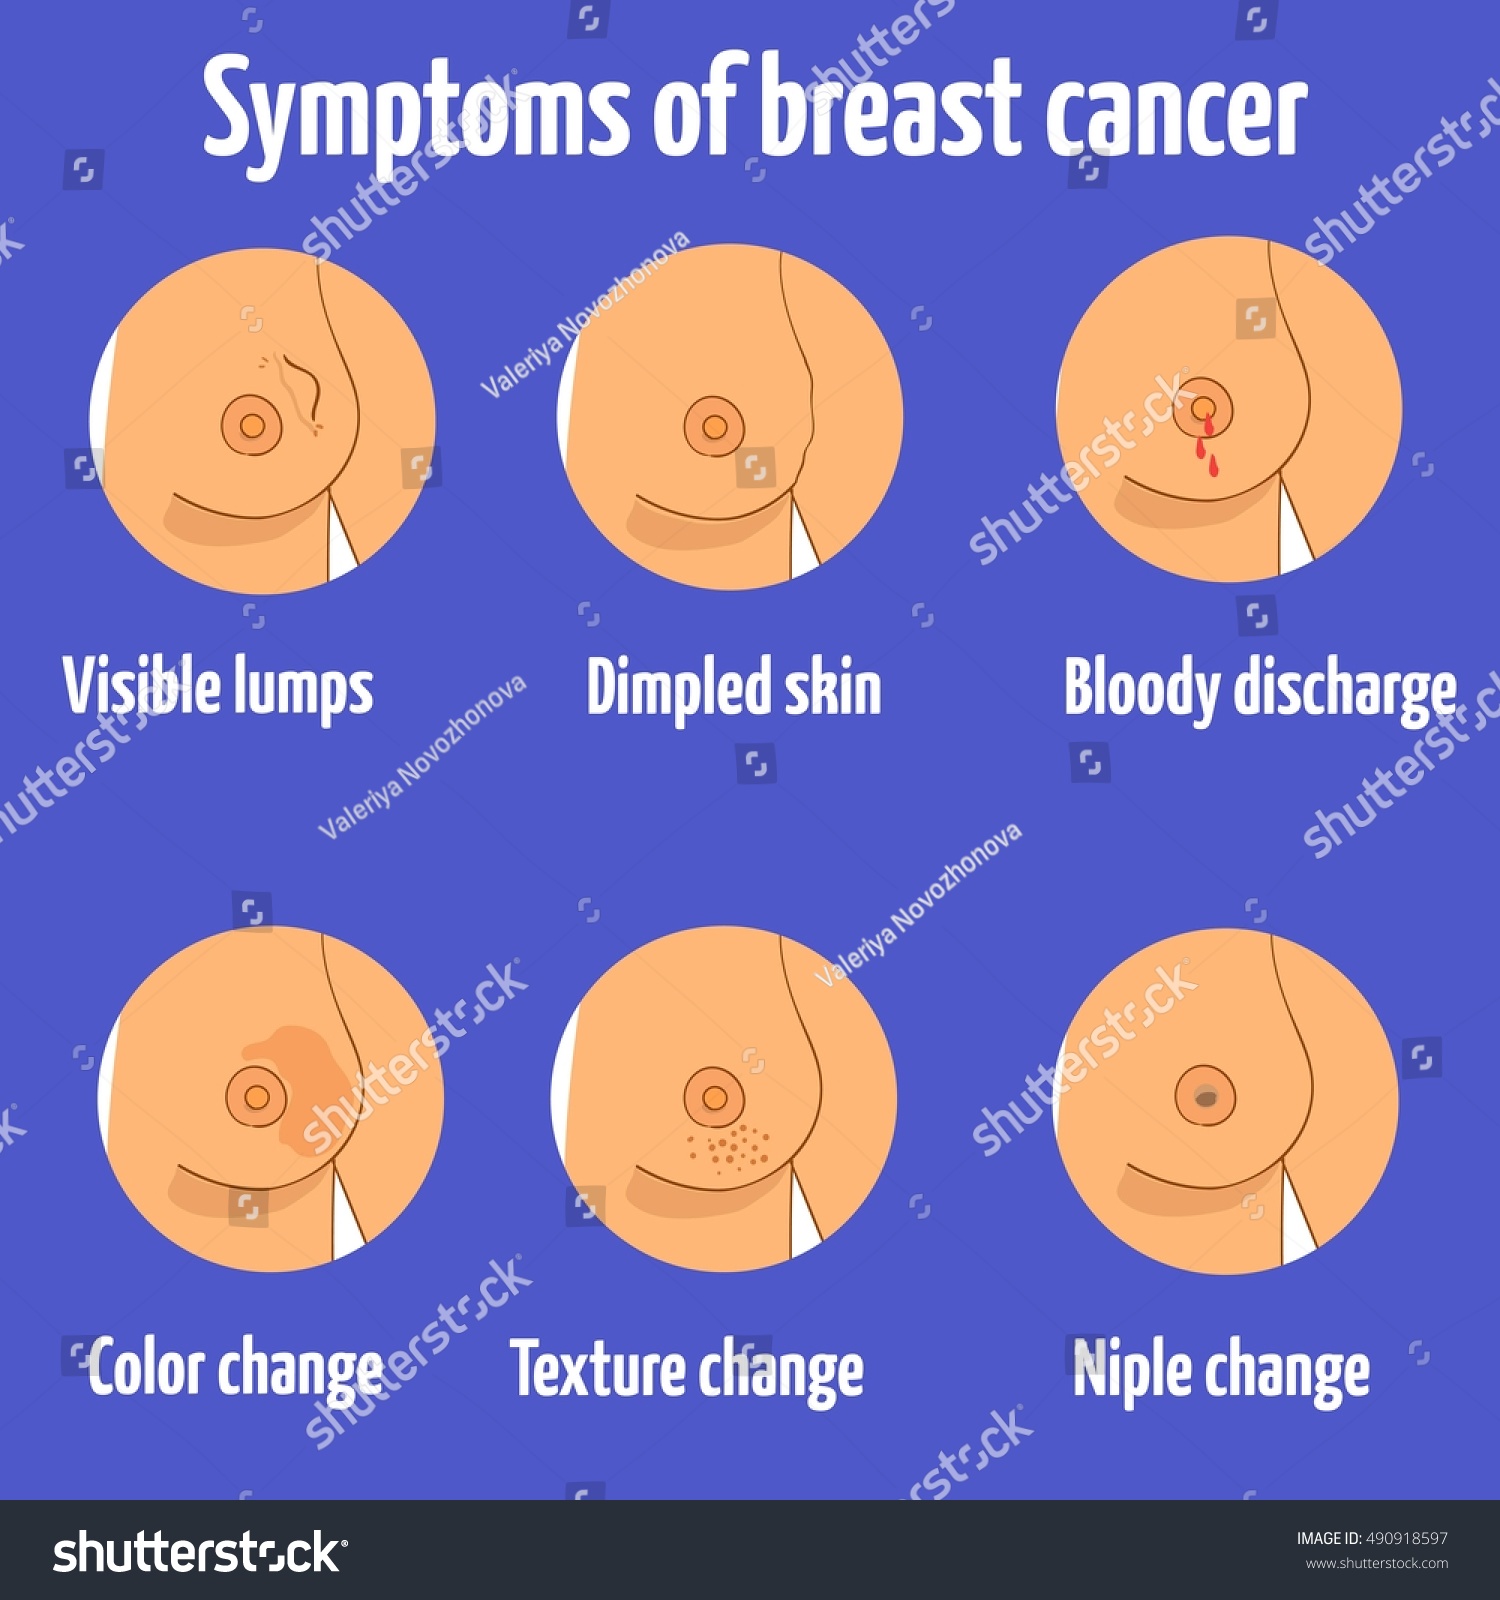 11 Symptoms Of Breast Cancer In Women That Aren't Lumps